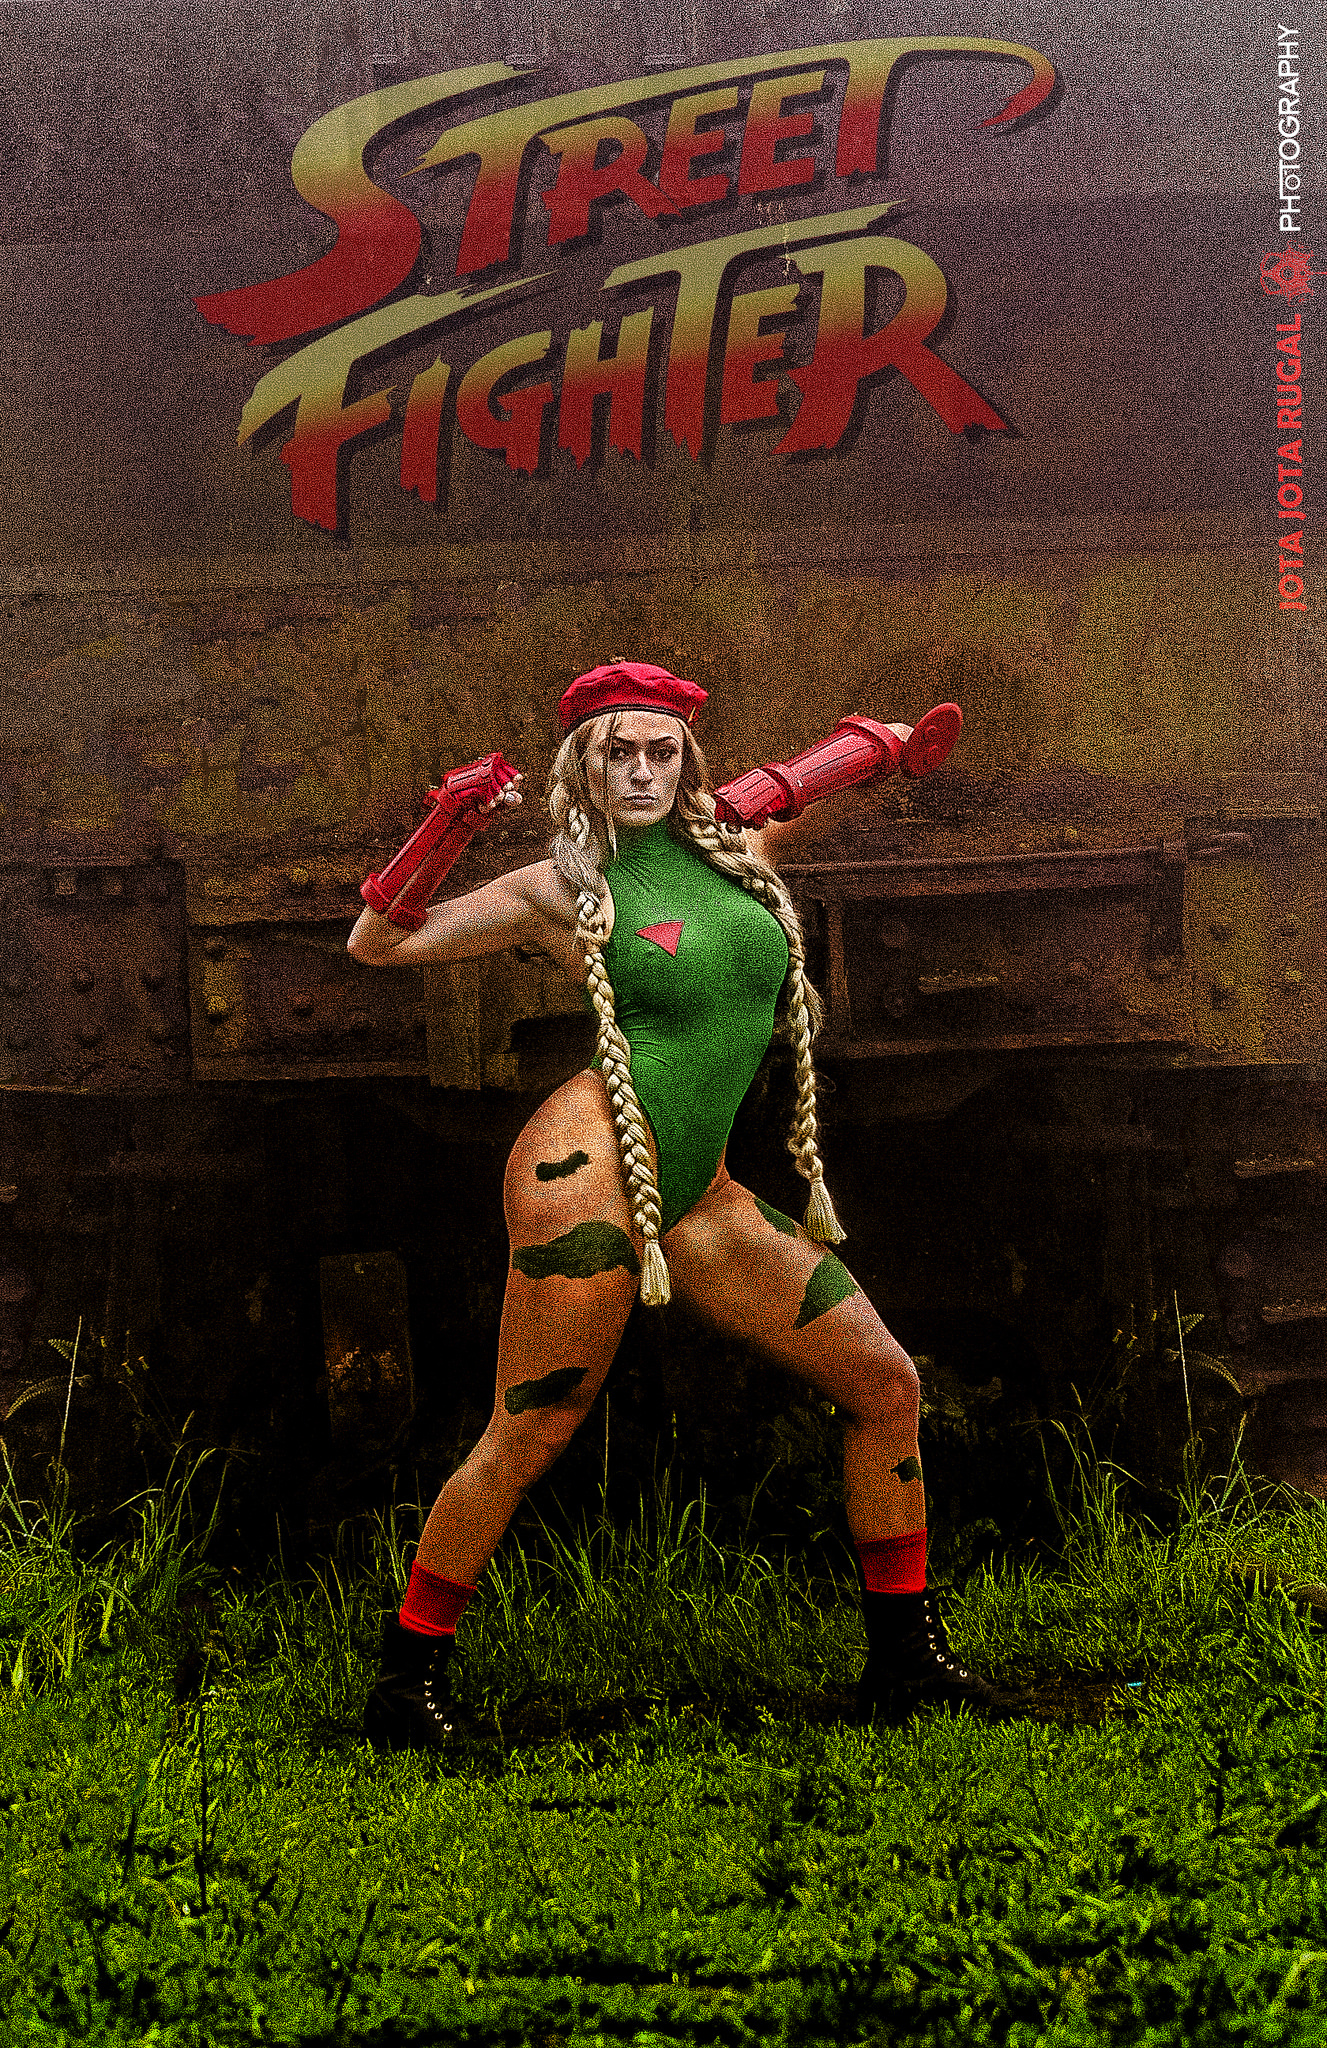 Jaque Marques as Cammy Street Fighter00